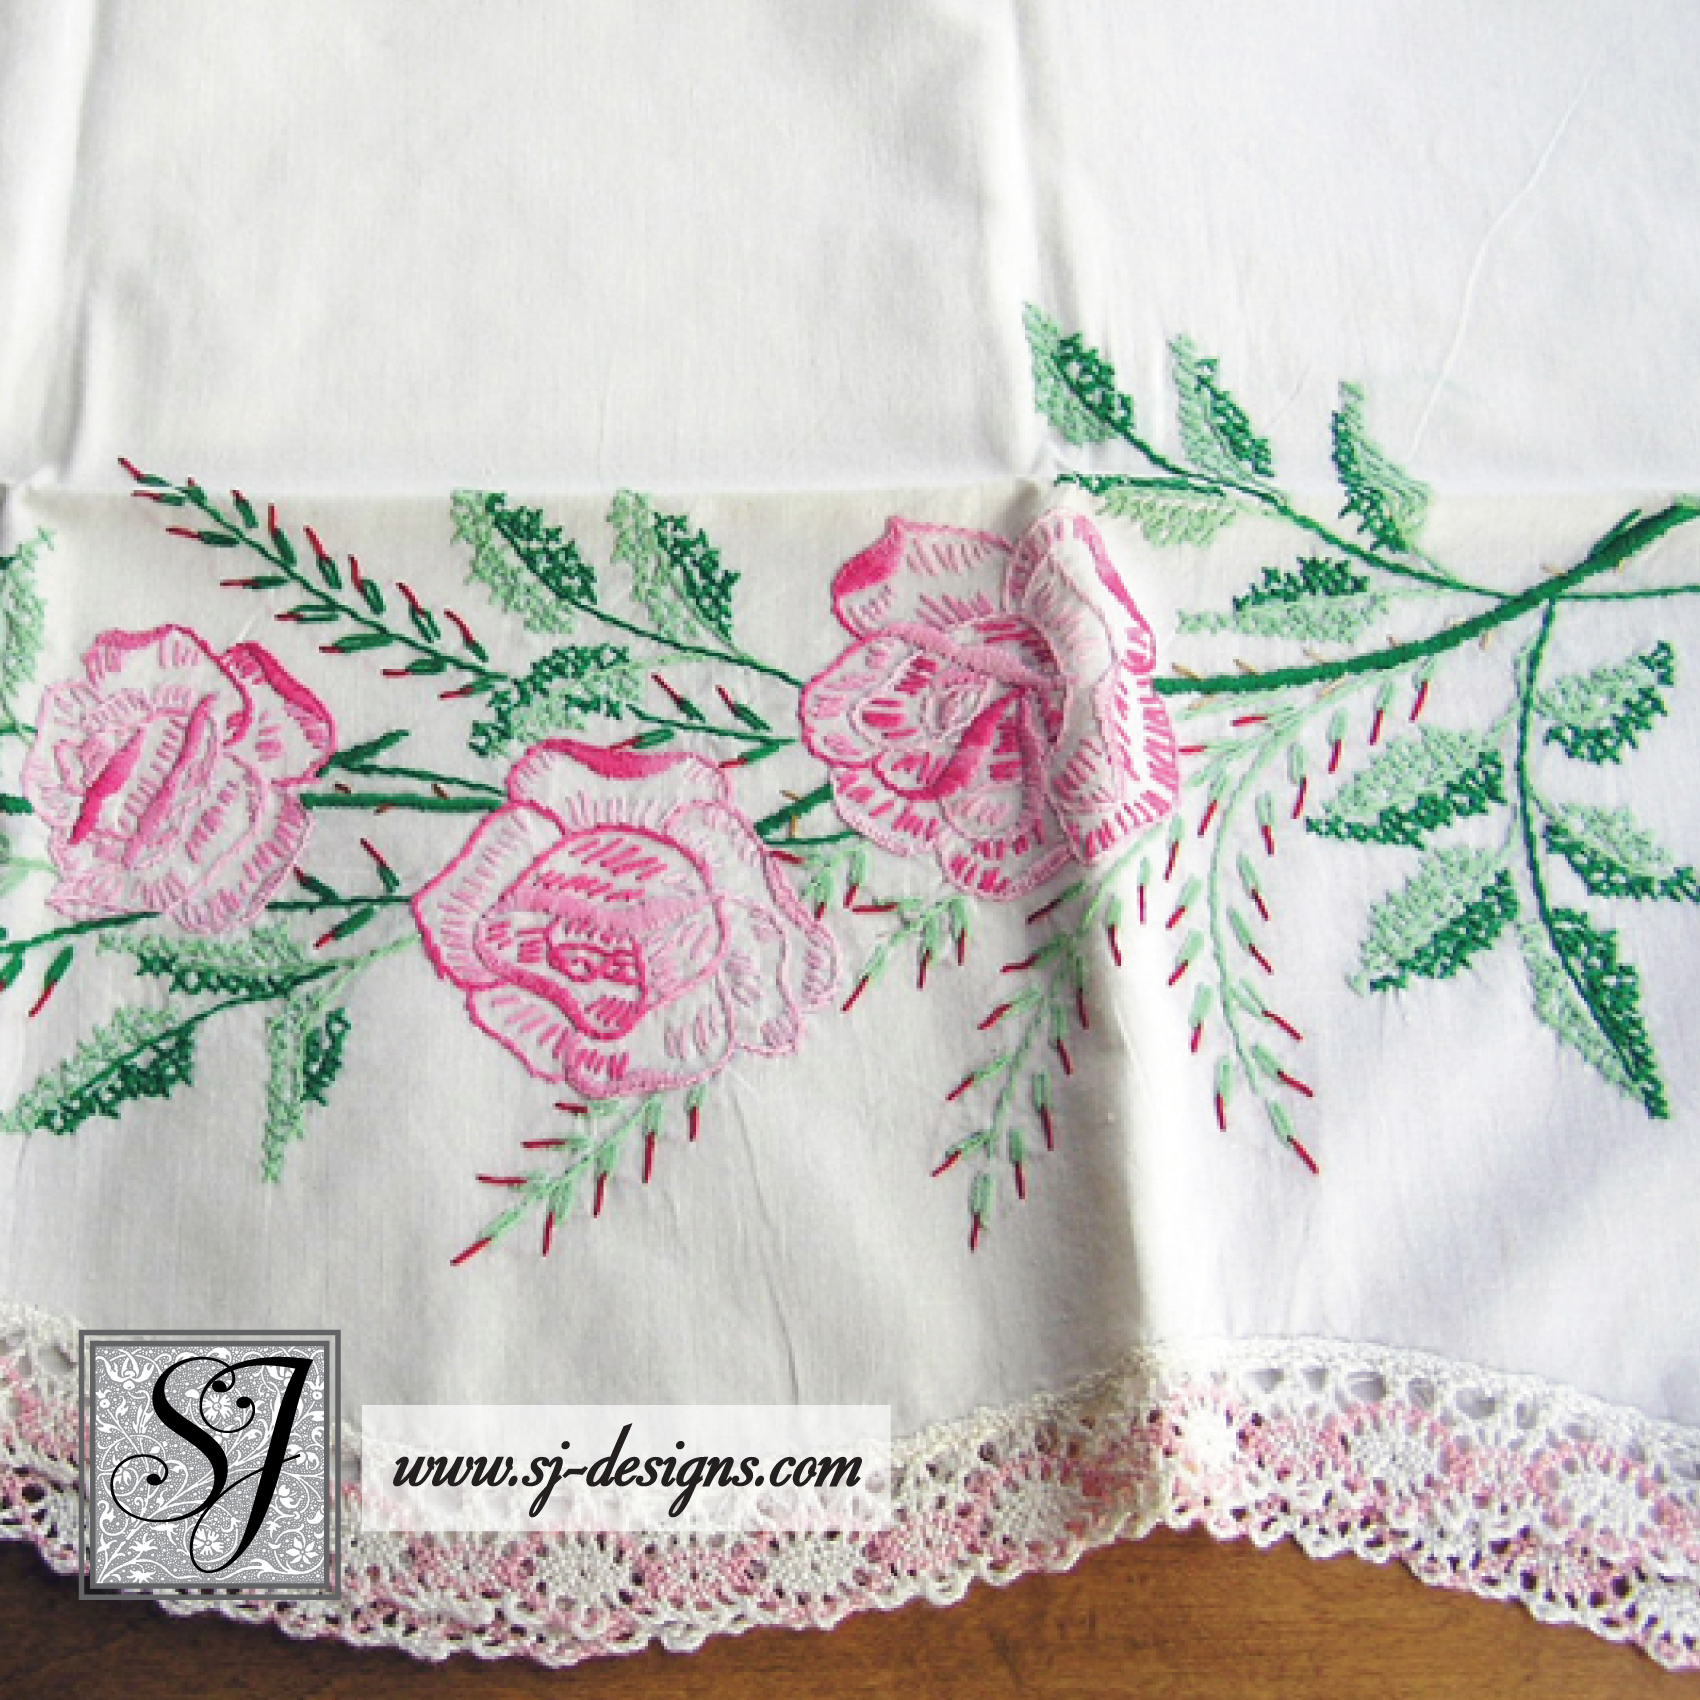 Hand Embroidery Patterns For Pillowcases Embroidery Designs On Pillow Cases Photos Table And Pillow